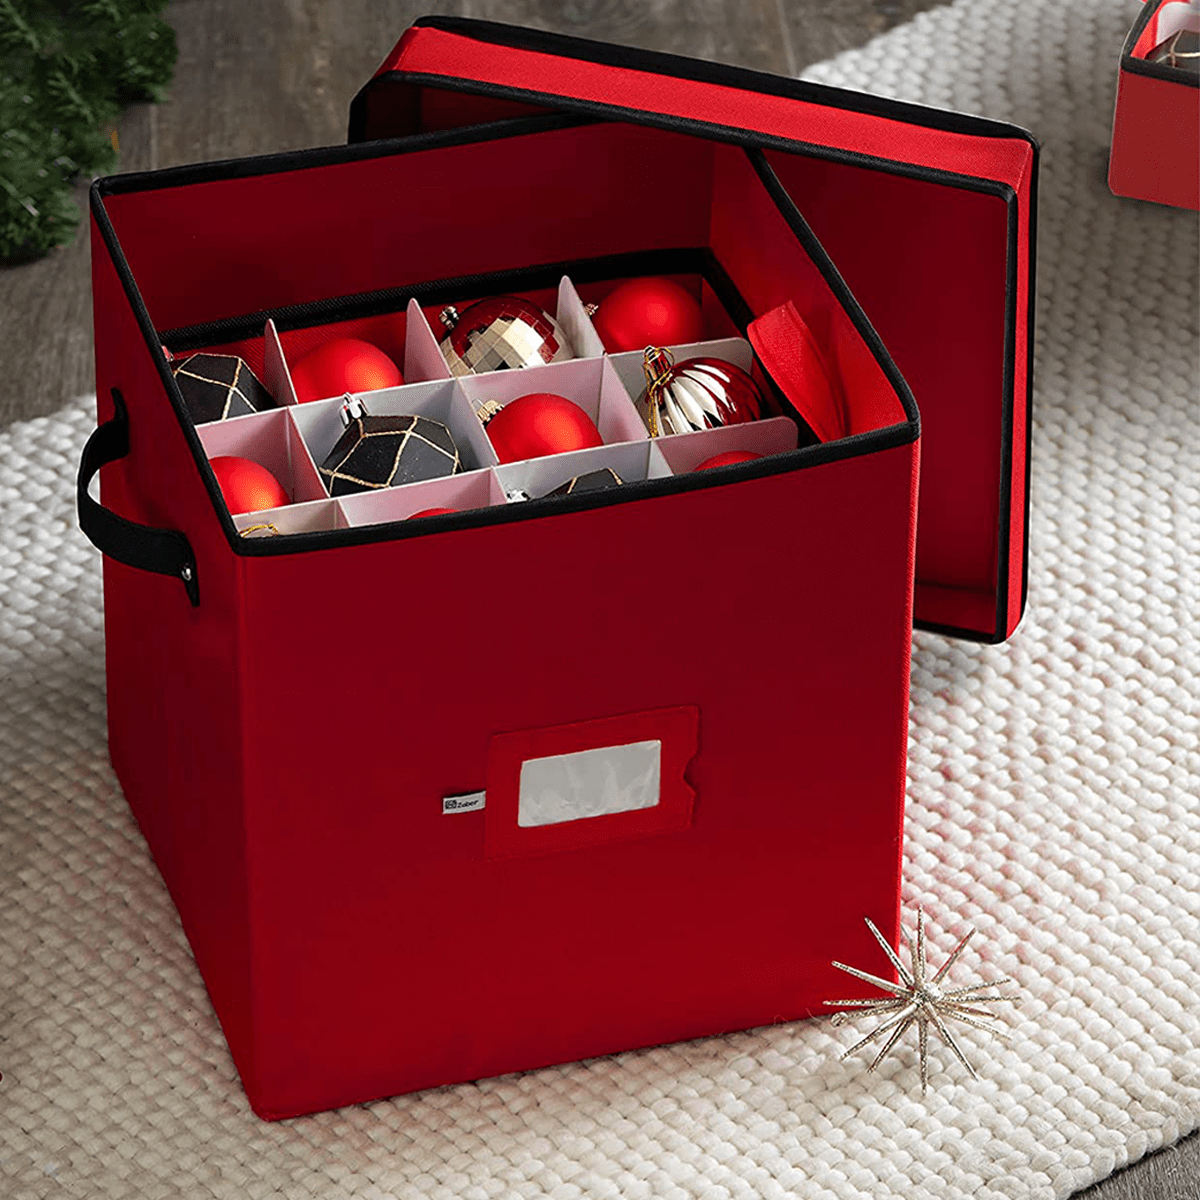 9 Best Christmas Storage Bins for Your Holiday Decorations 2022